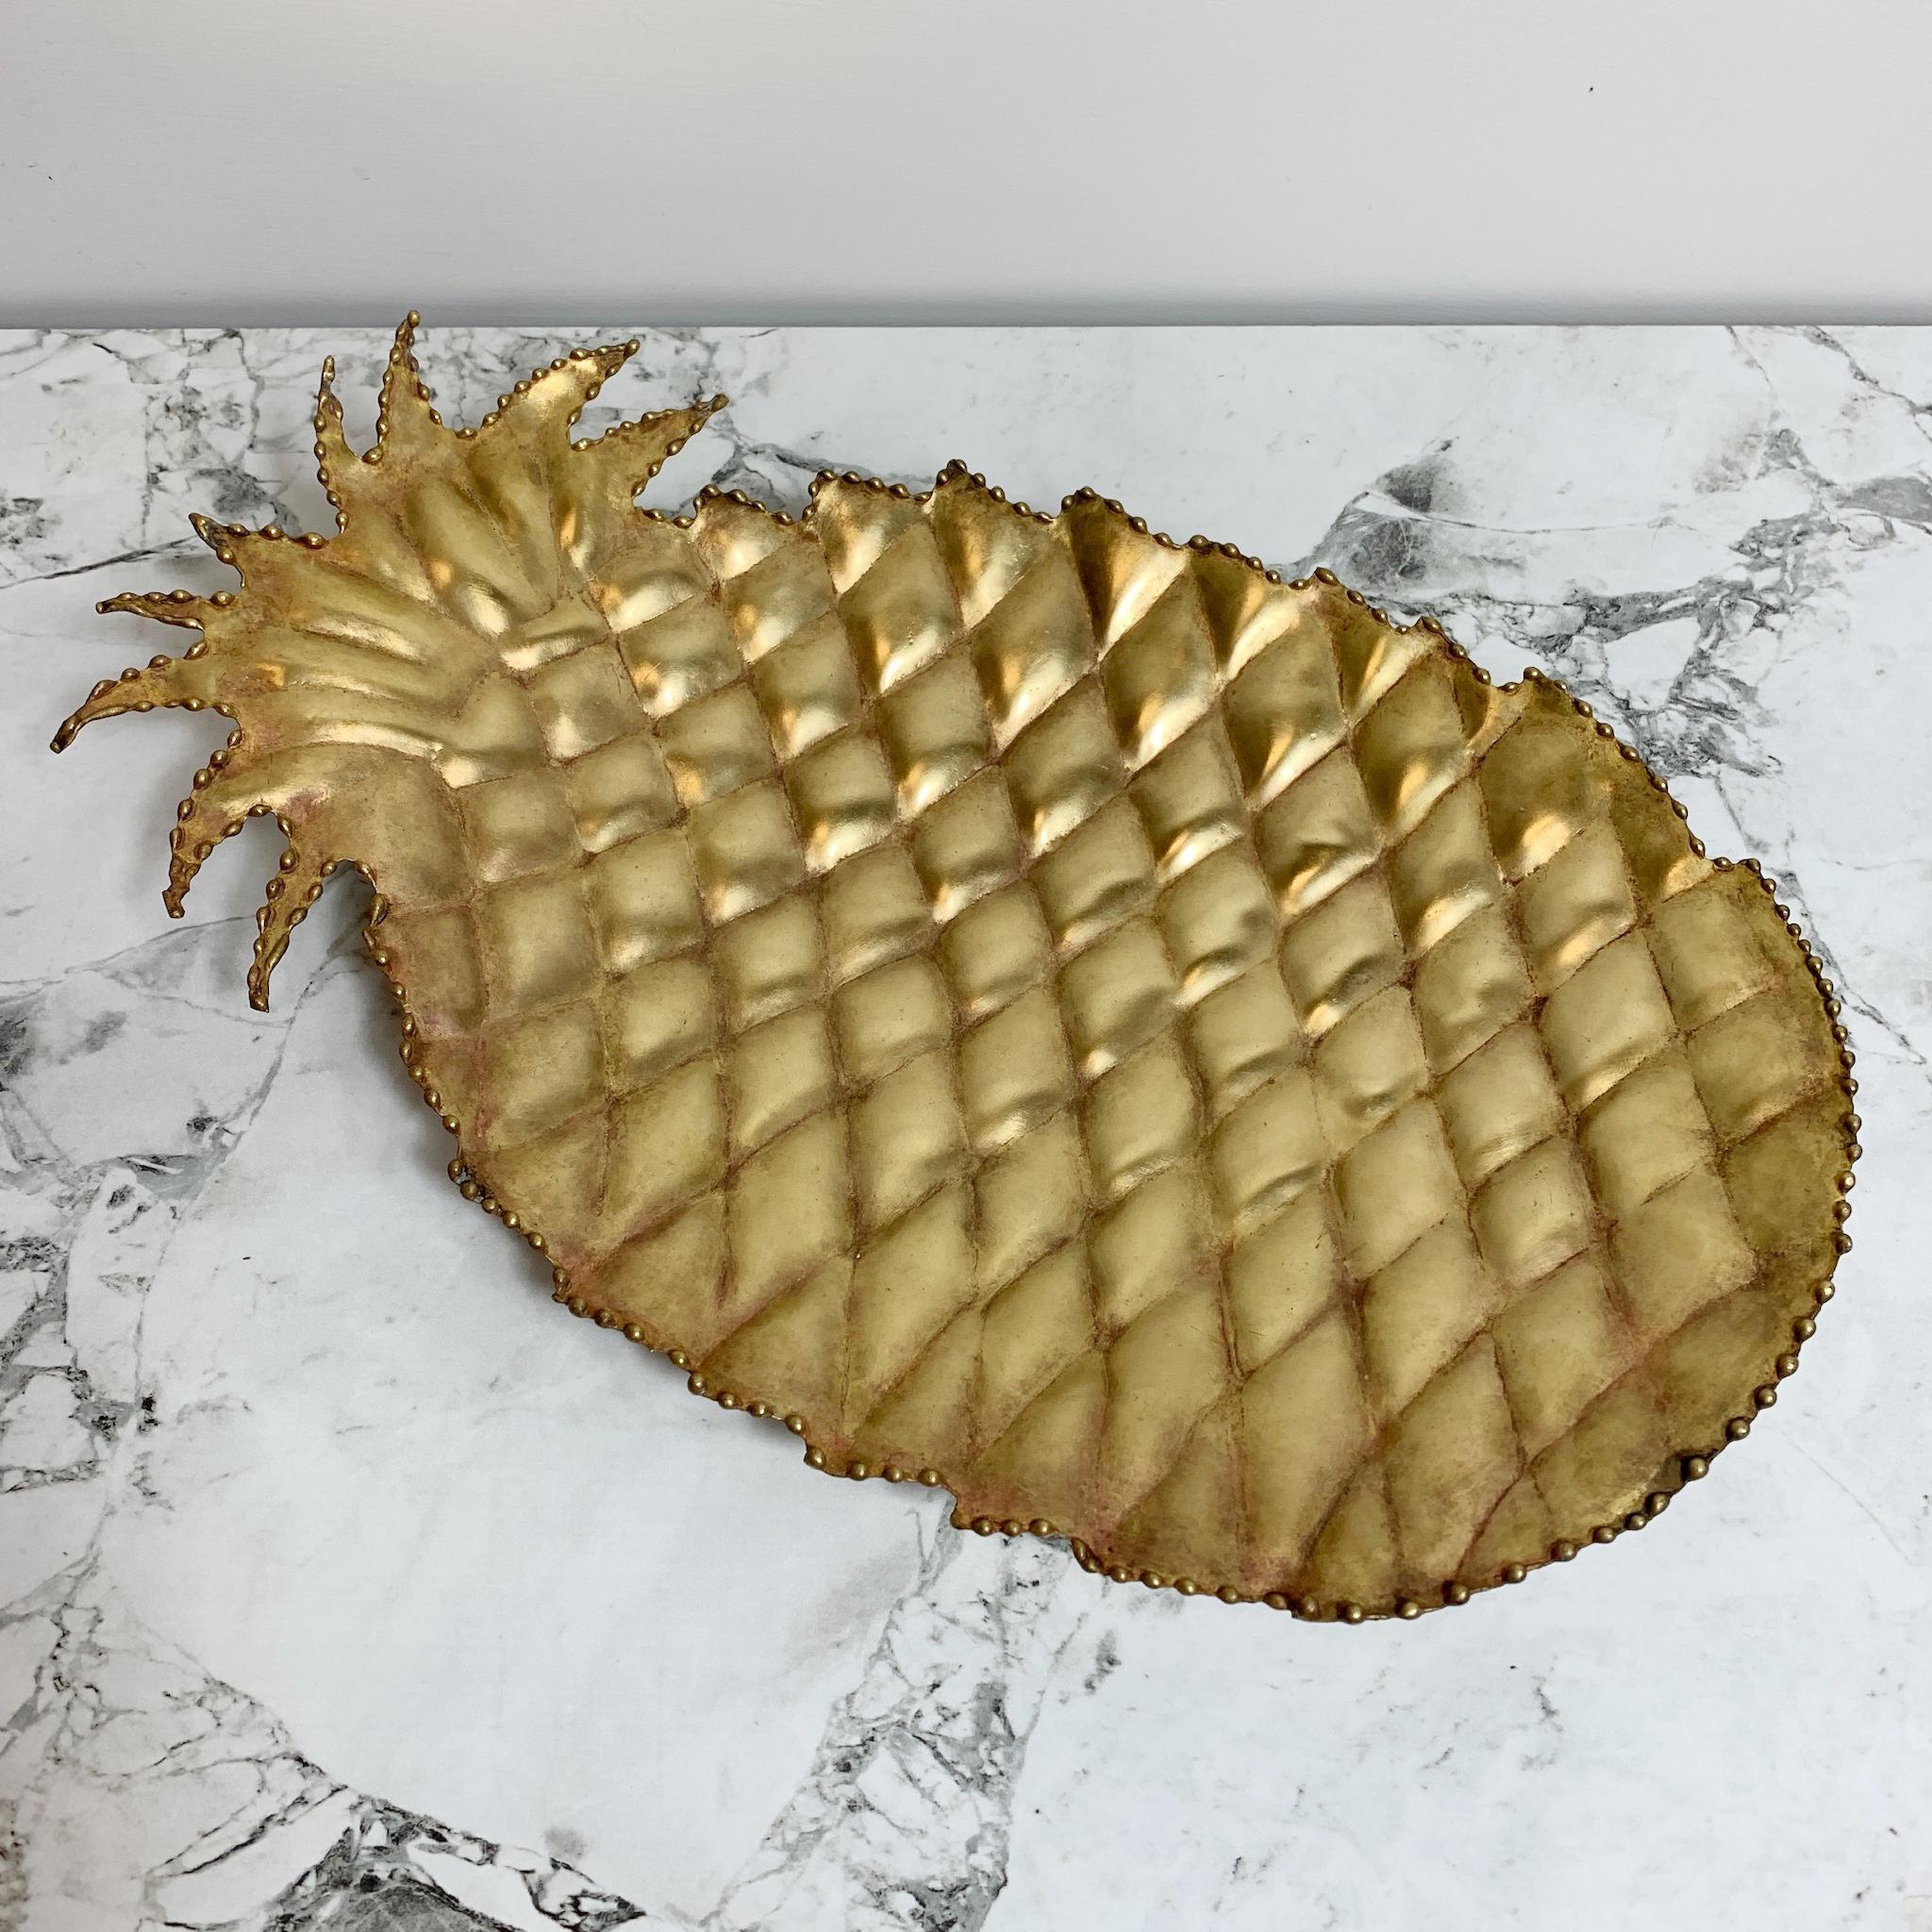 Maison Jansen attributed brass pineapple dish, 1970s
Large brass handcrafted brass dish with classic Jansen edging detail
Measures: 45cm length, 28cm width, 9cm depth
The dish has 3 small brass ball feet underneath.